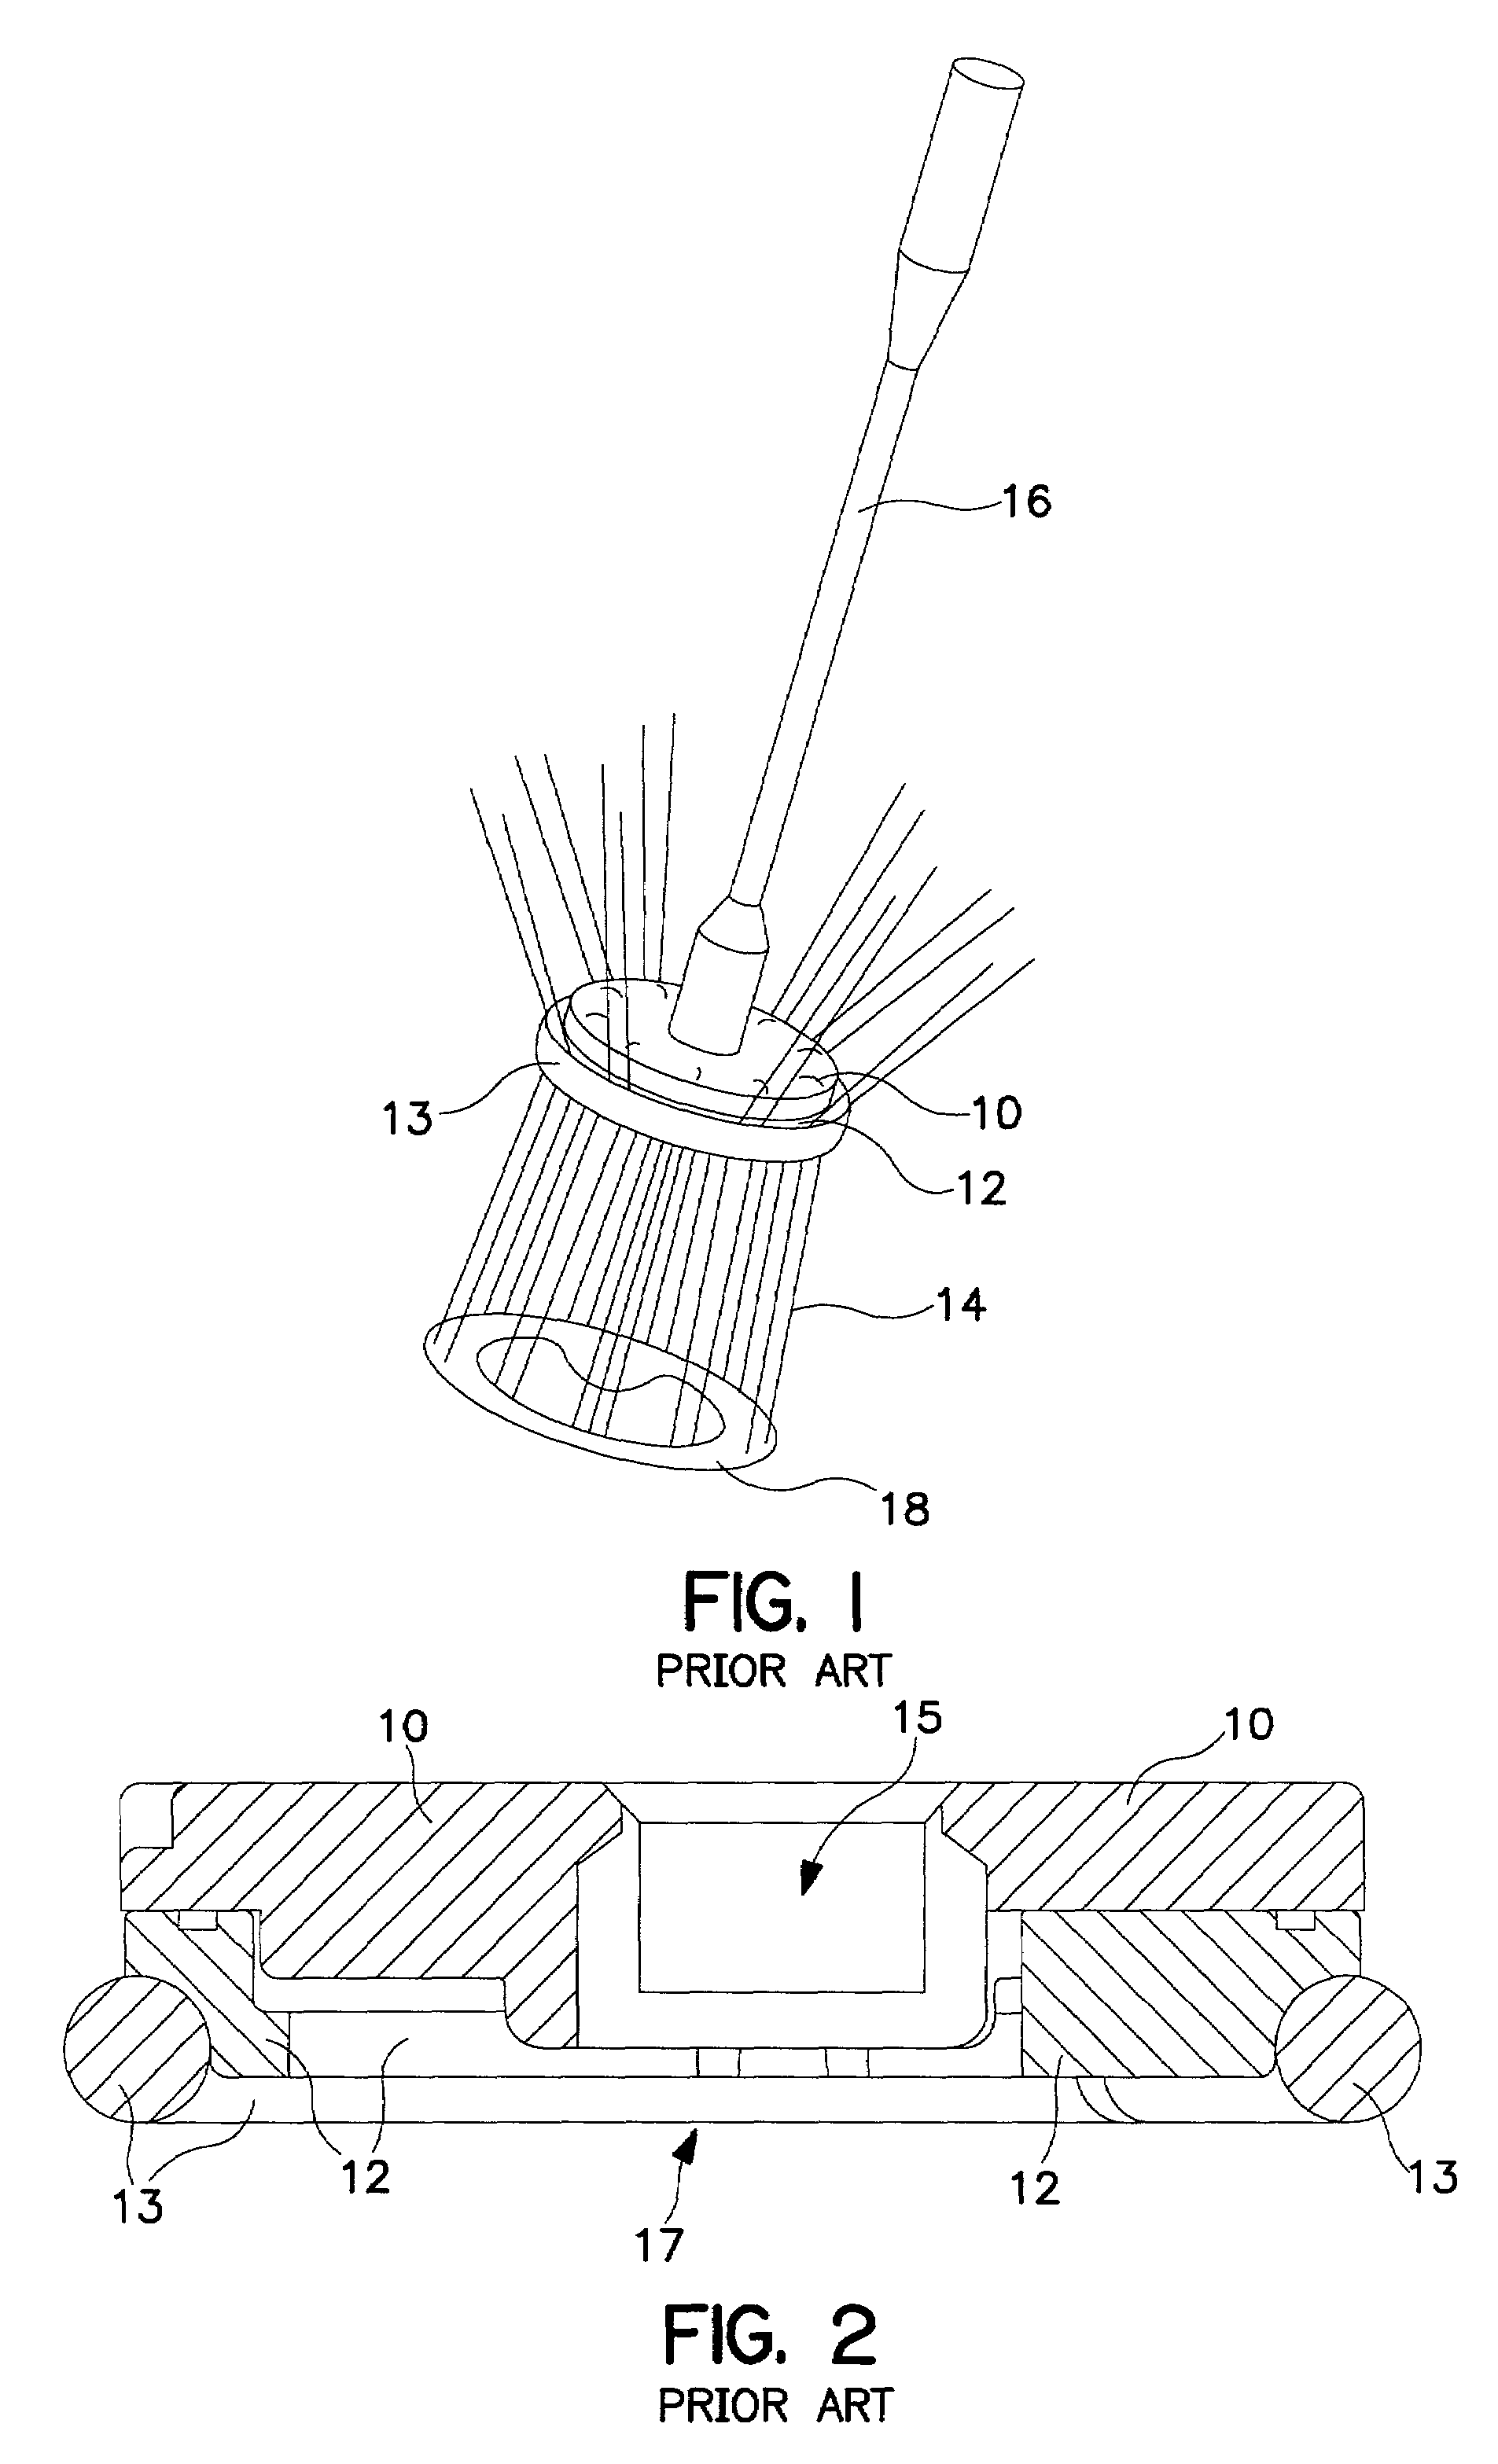 Flexible annuloplasty prosthesis and holder